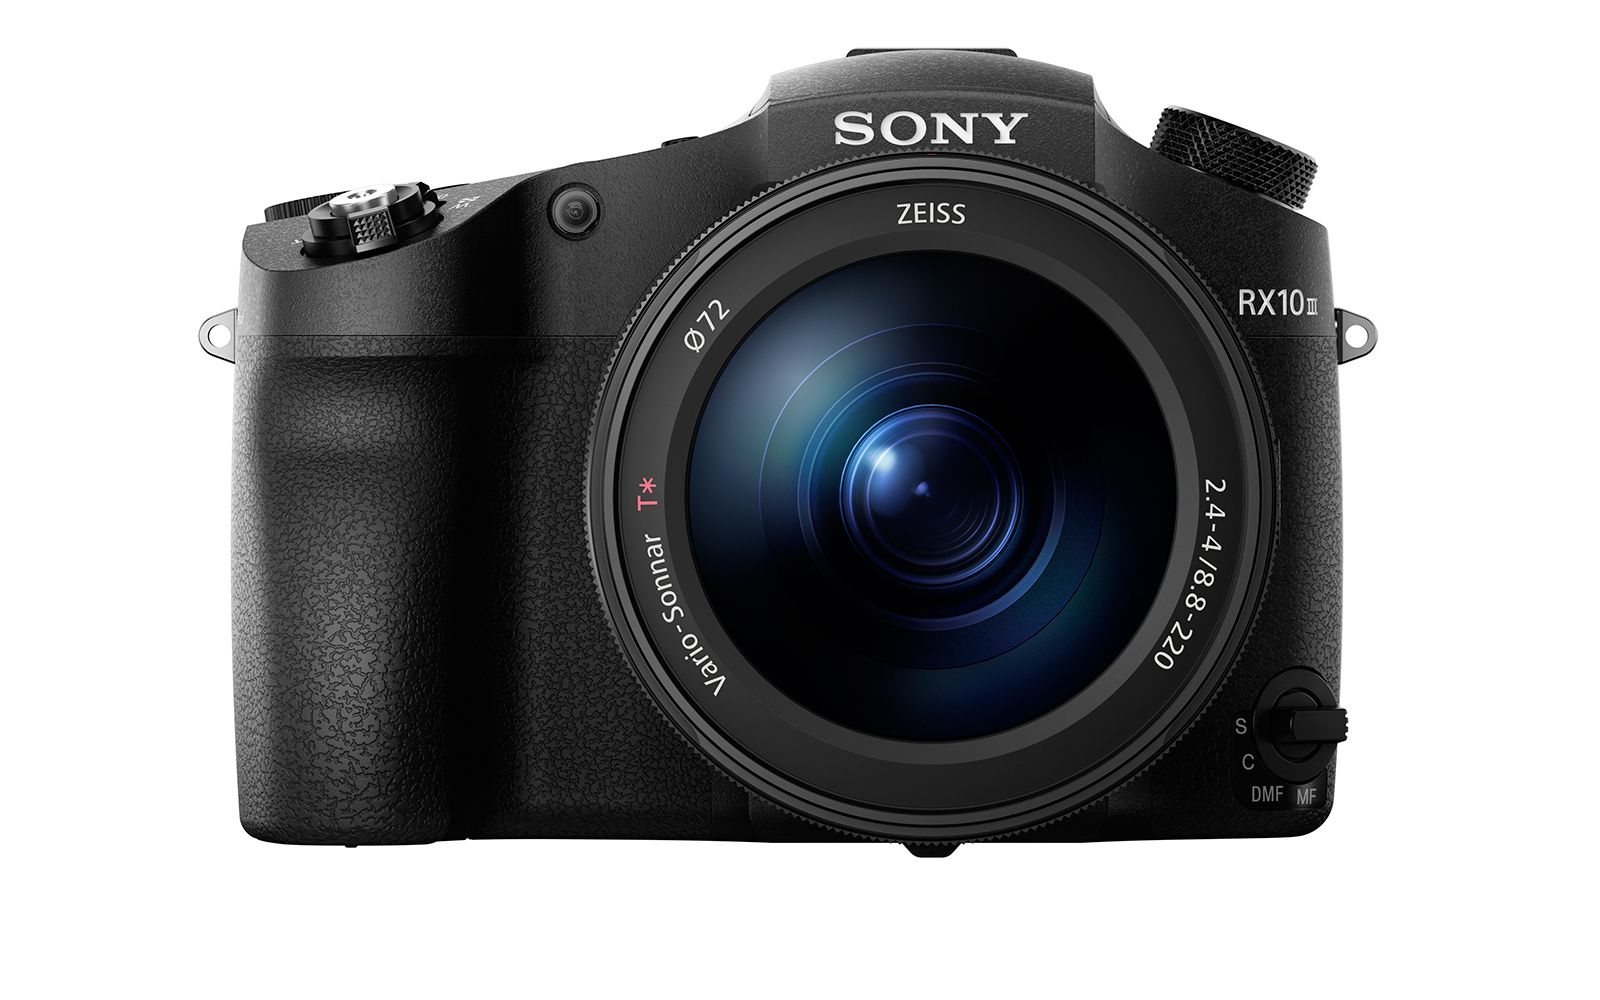 sony cyber shot rx10 iii superzoom boasts 24 600mm zoom and 1 inch sensor size image 1